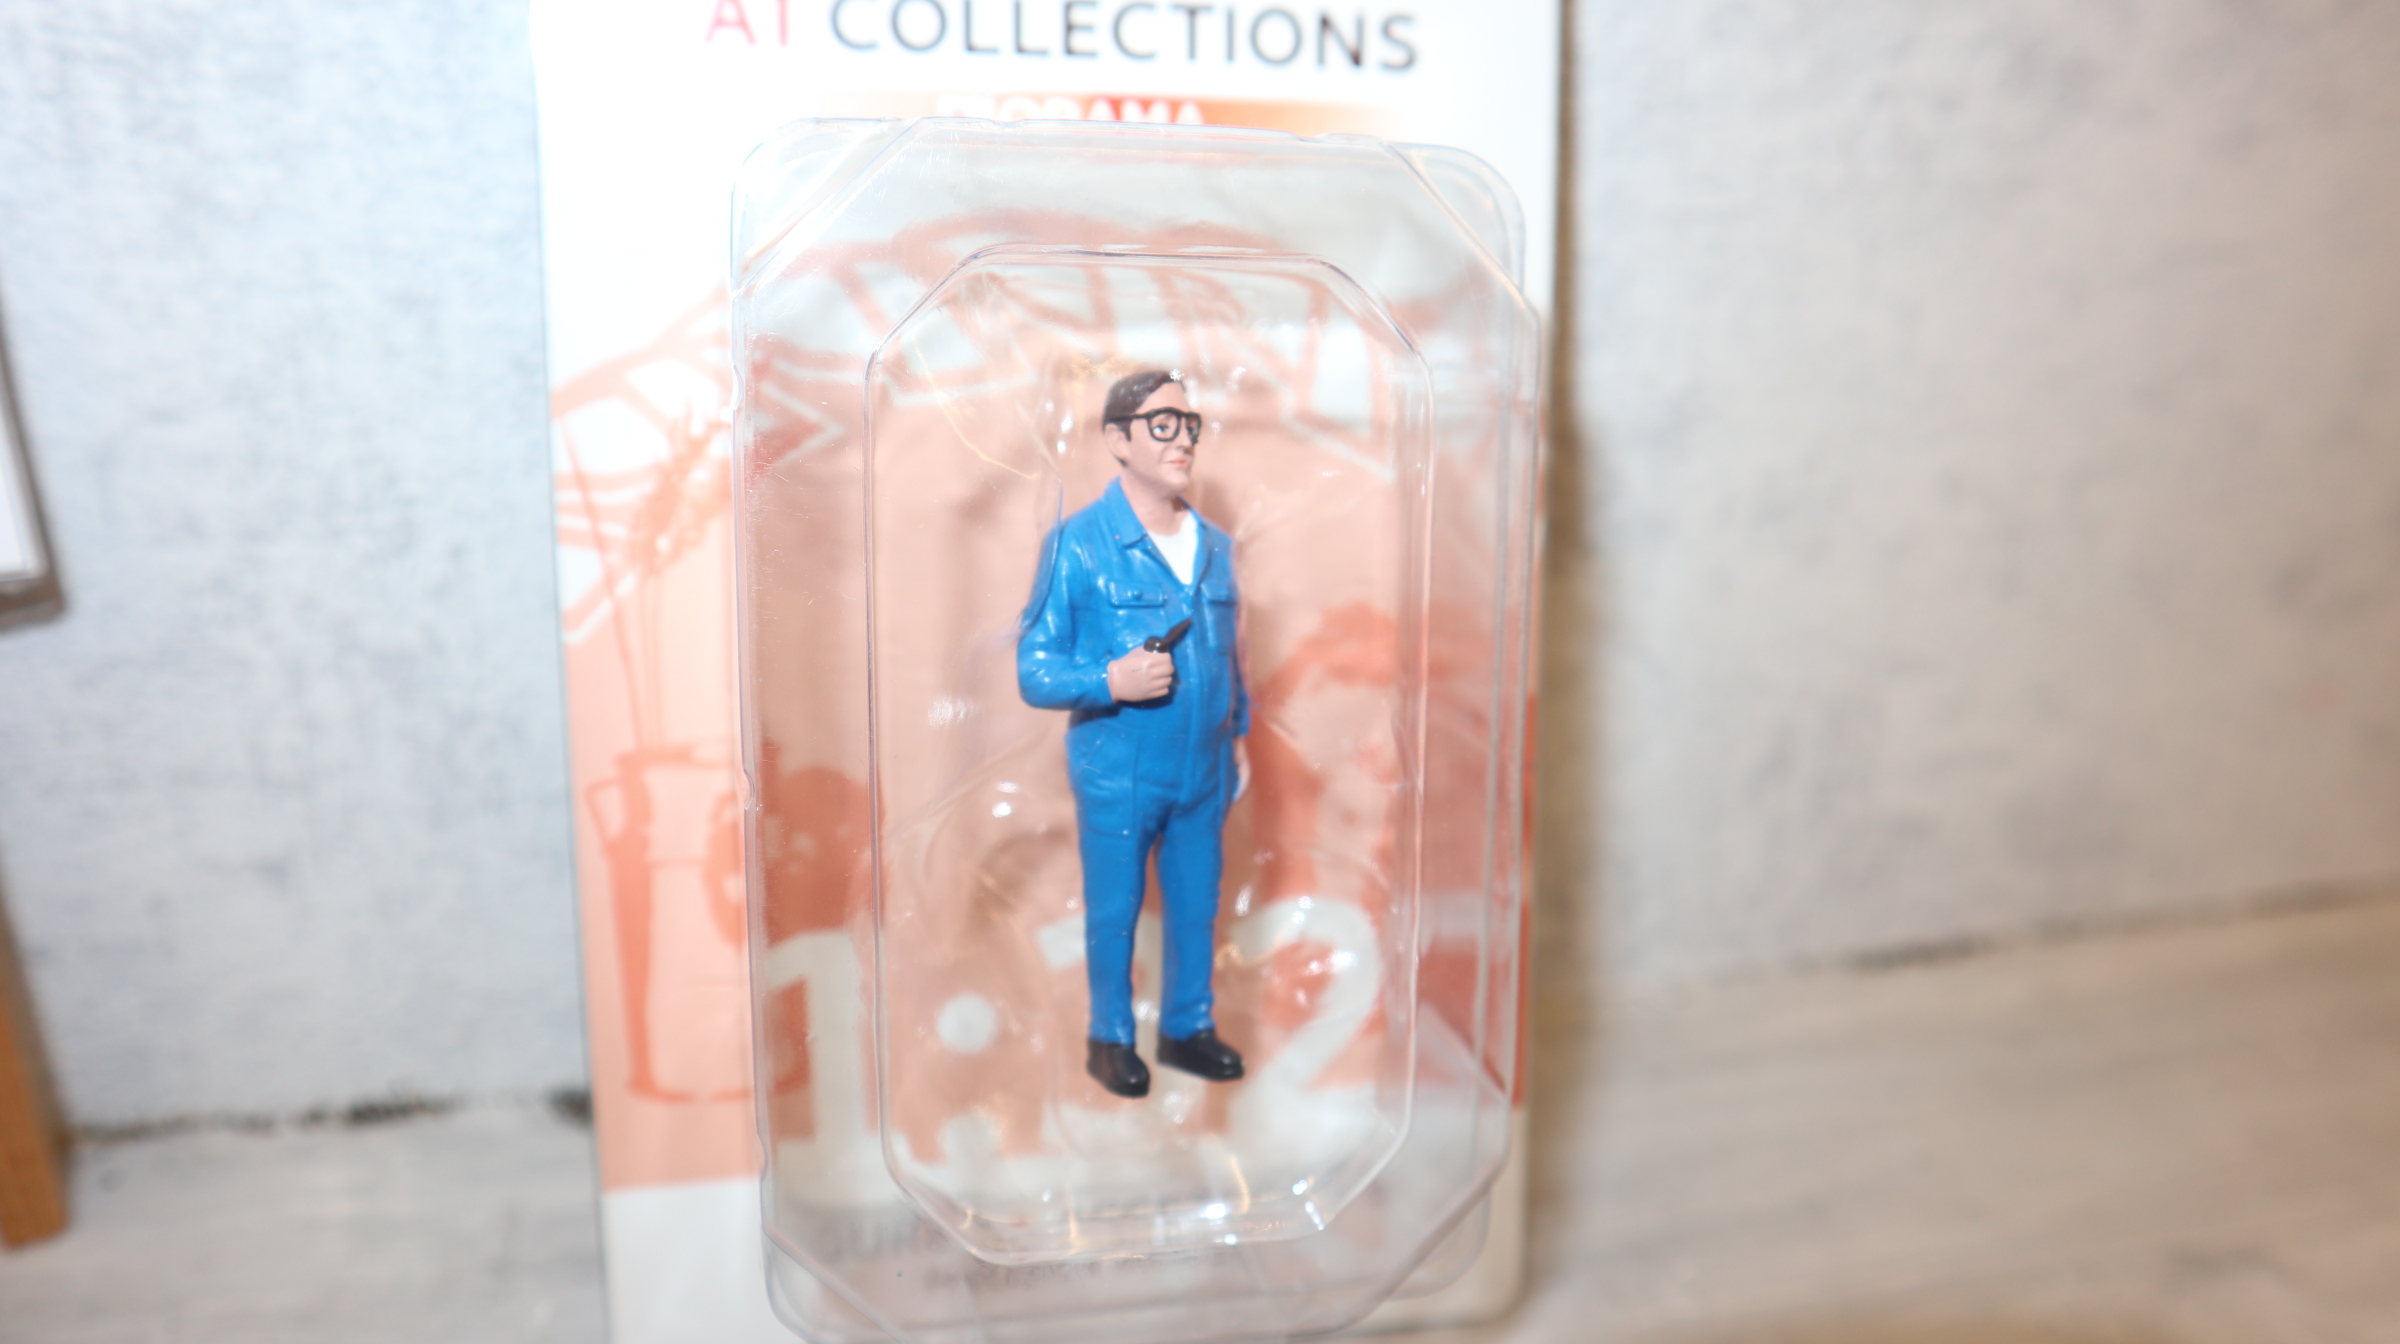 AT Collections 32149 in 1:32,  Figur "Martin mit Pipe",  NEU in OVP